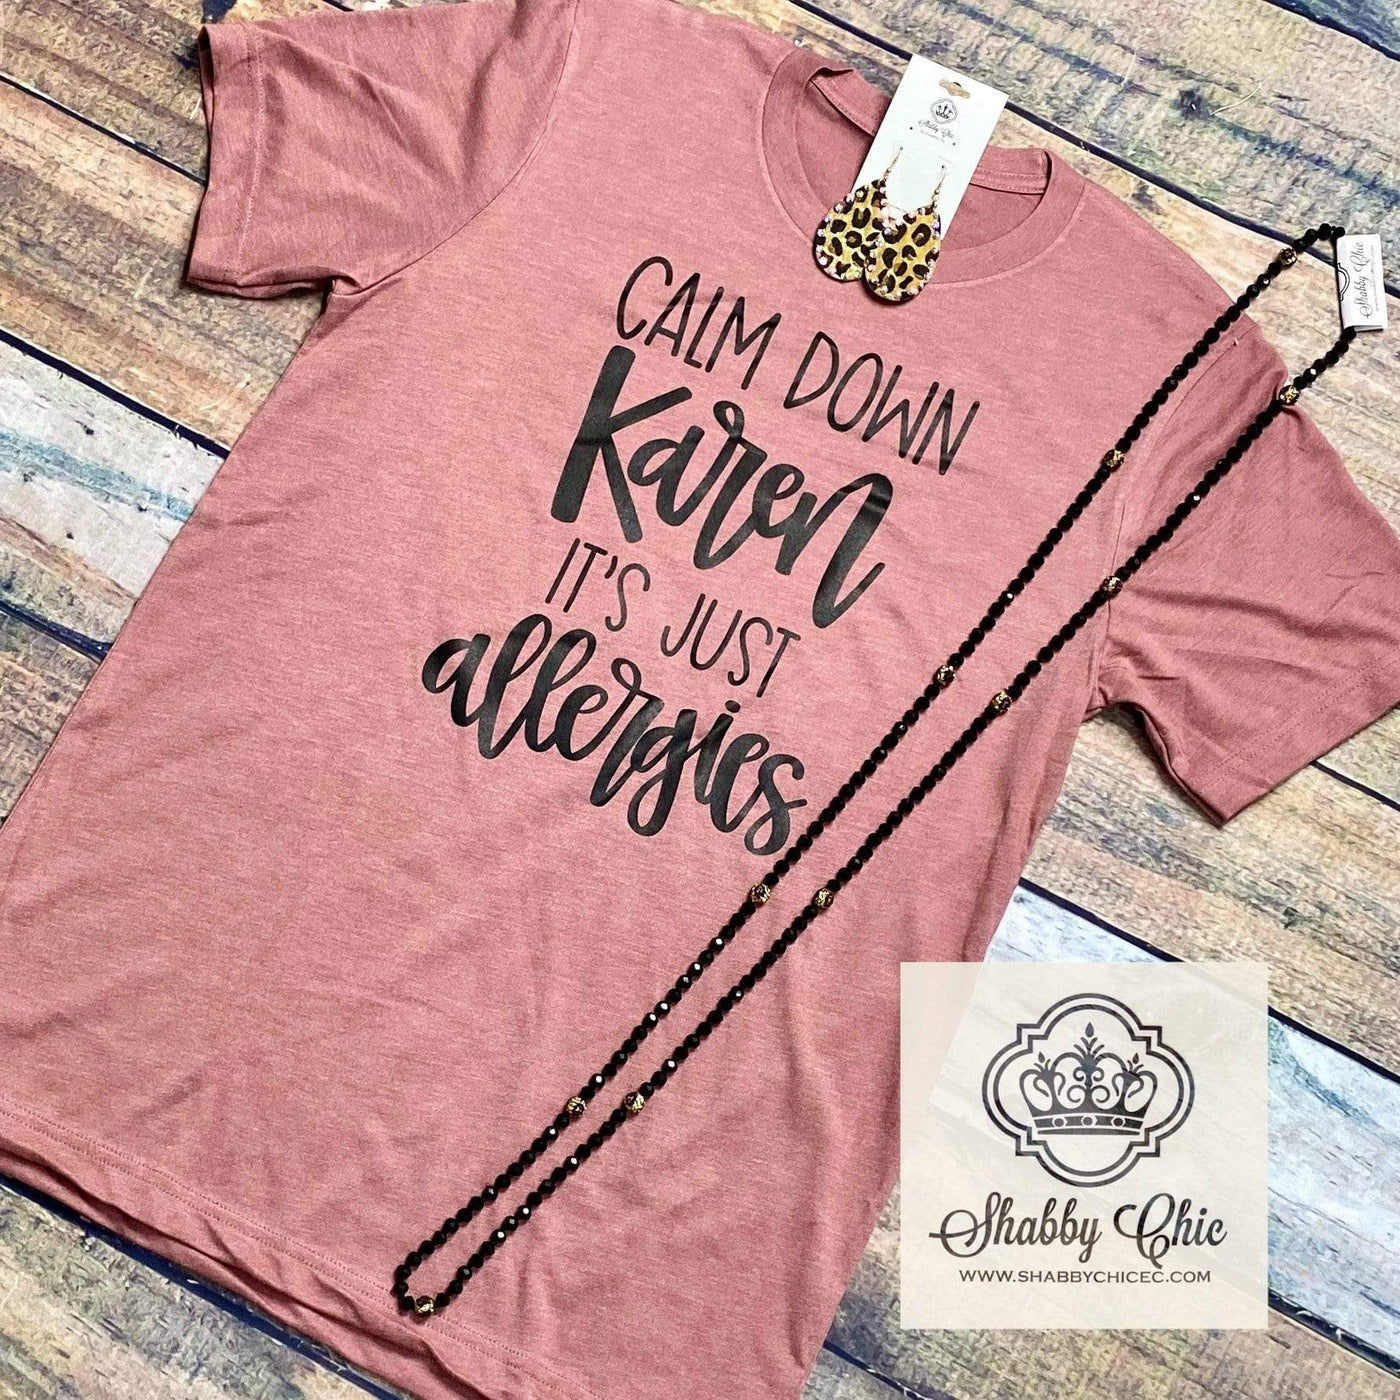 Calm Down Karen Tee - Black Lettering Shabby Chic Boutique and Tanning Salon